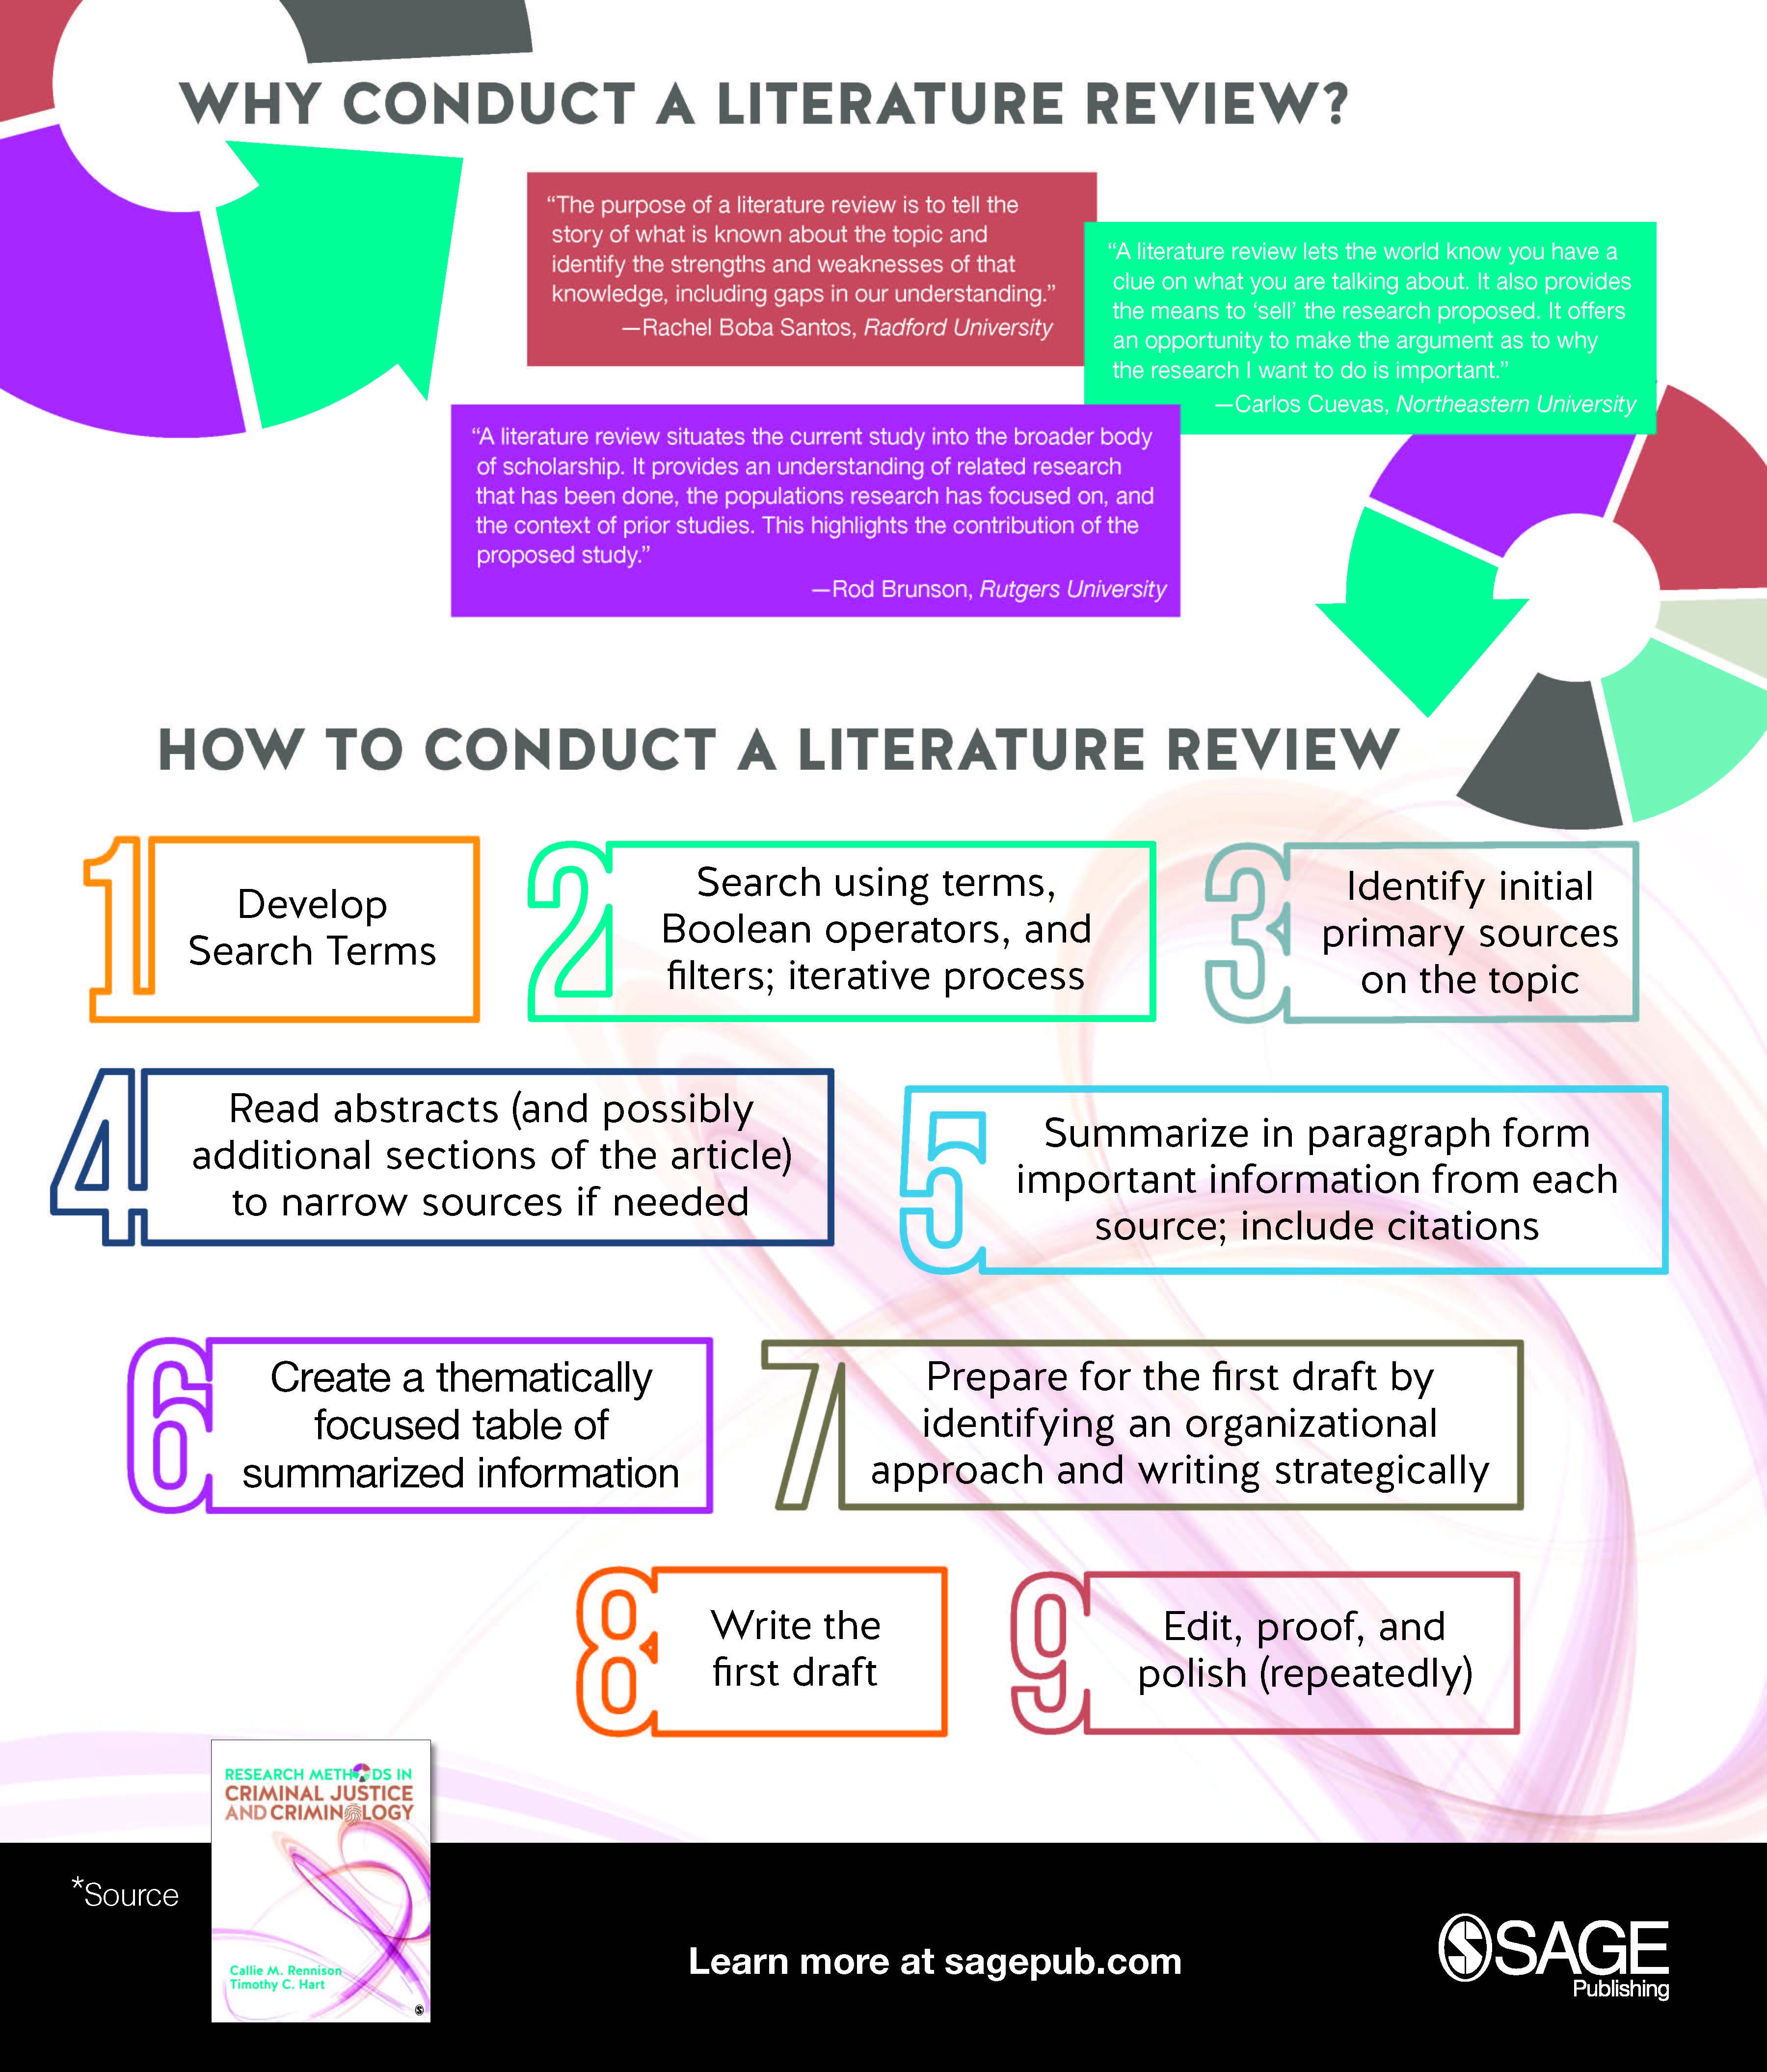 the first step in conducting a literature review is